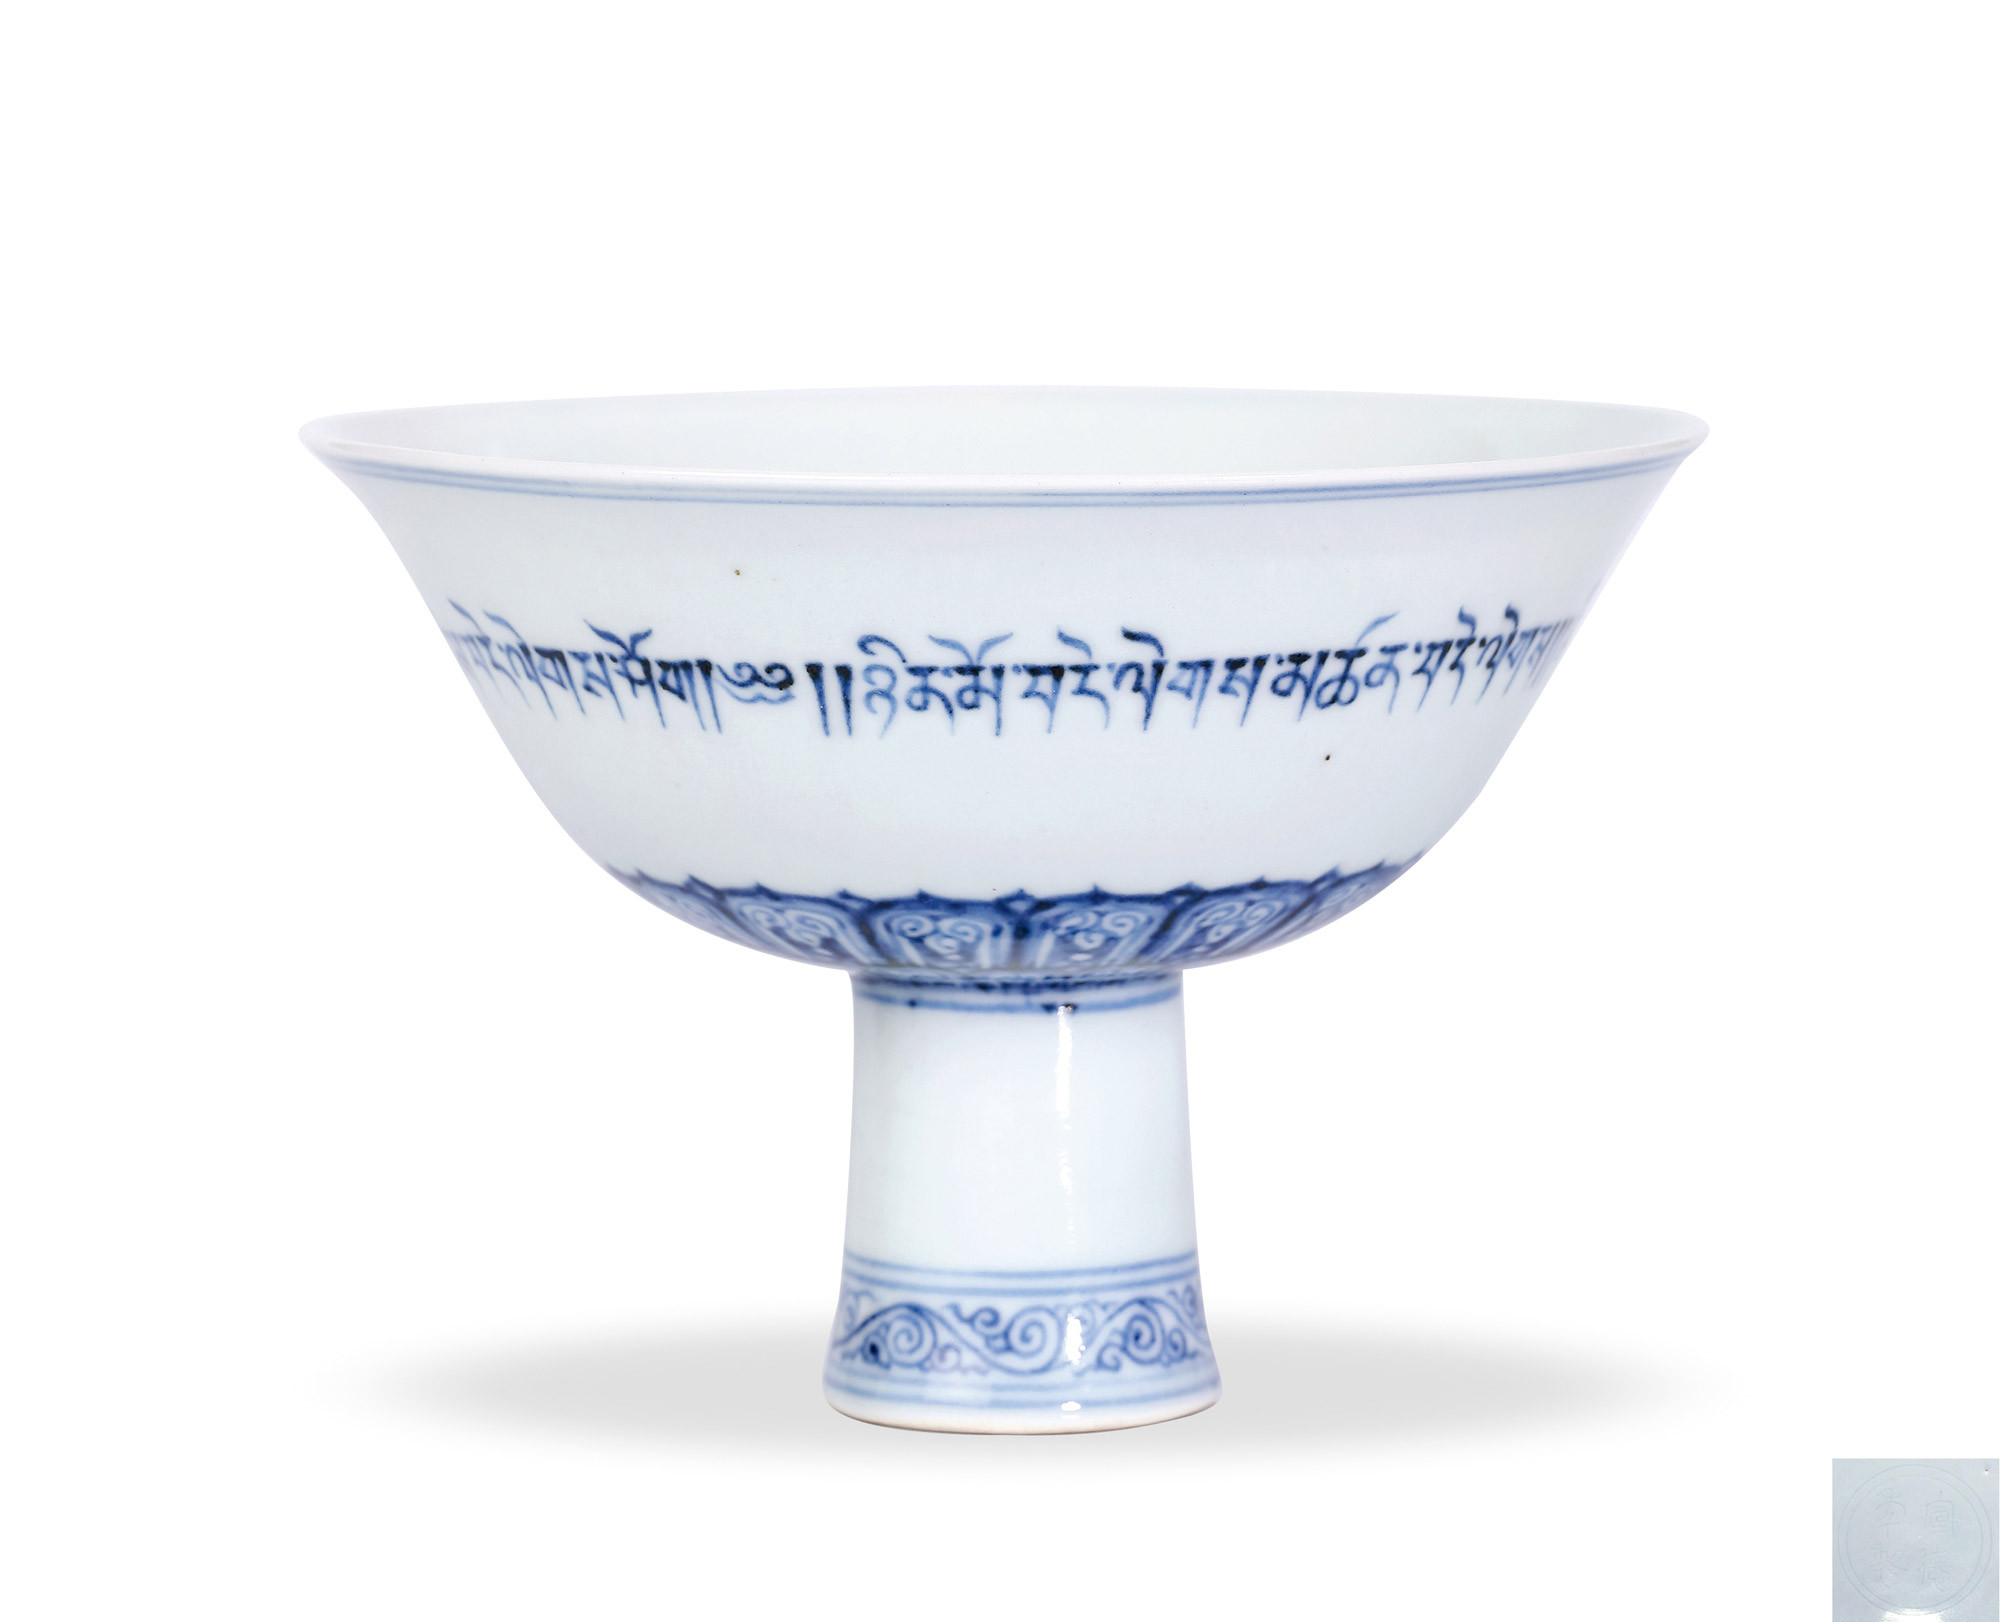 AN IMPERIAL BLUE AND WHITE STEMBOWL WITH DESIGN OF TIBETAN SCRIPTURE